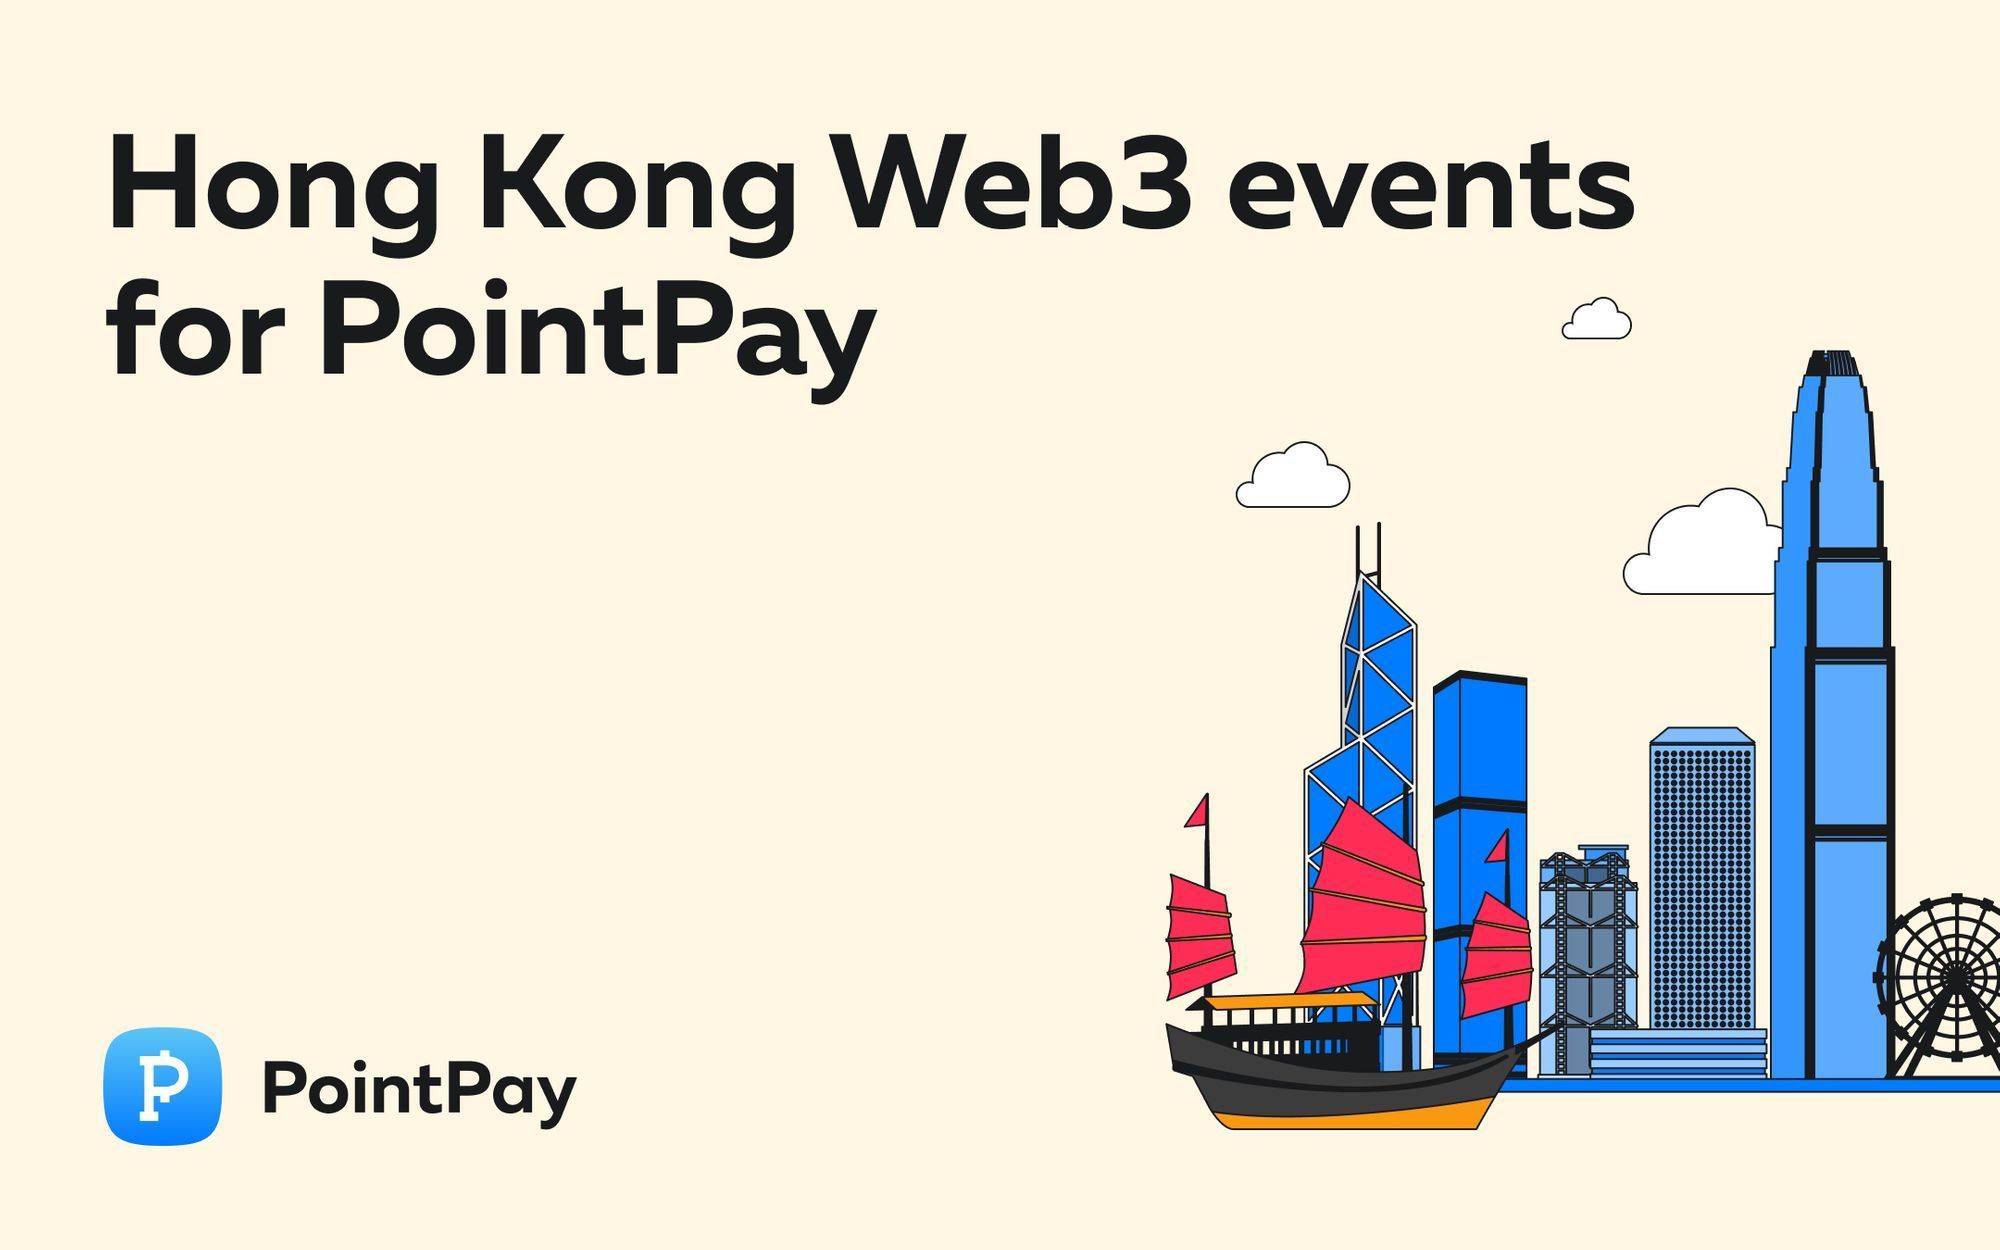 PointPay participated in large-scale Web3 events in Hong Kong